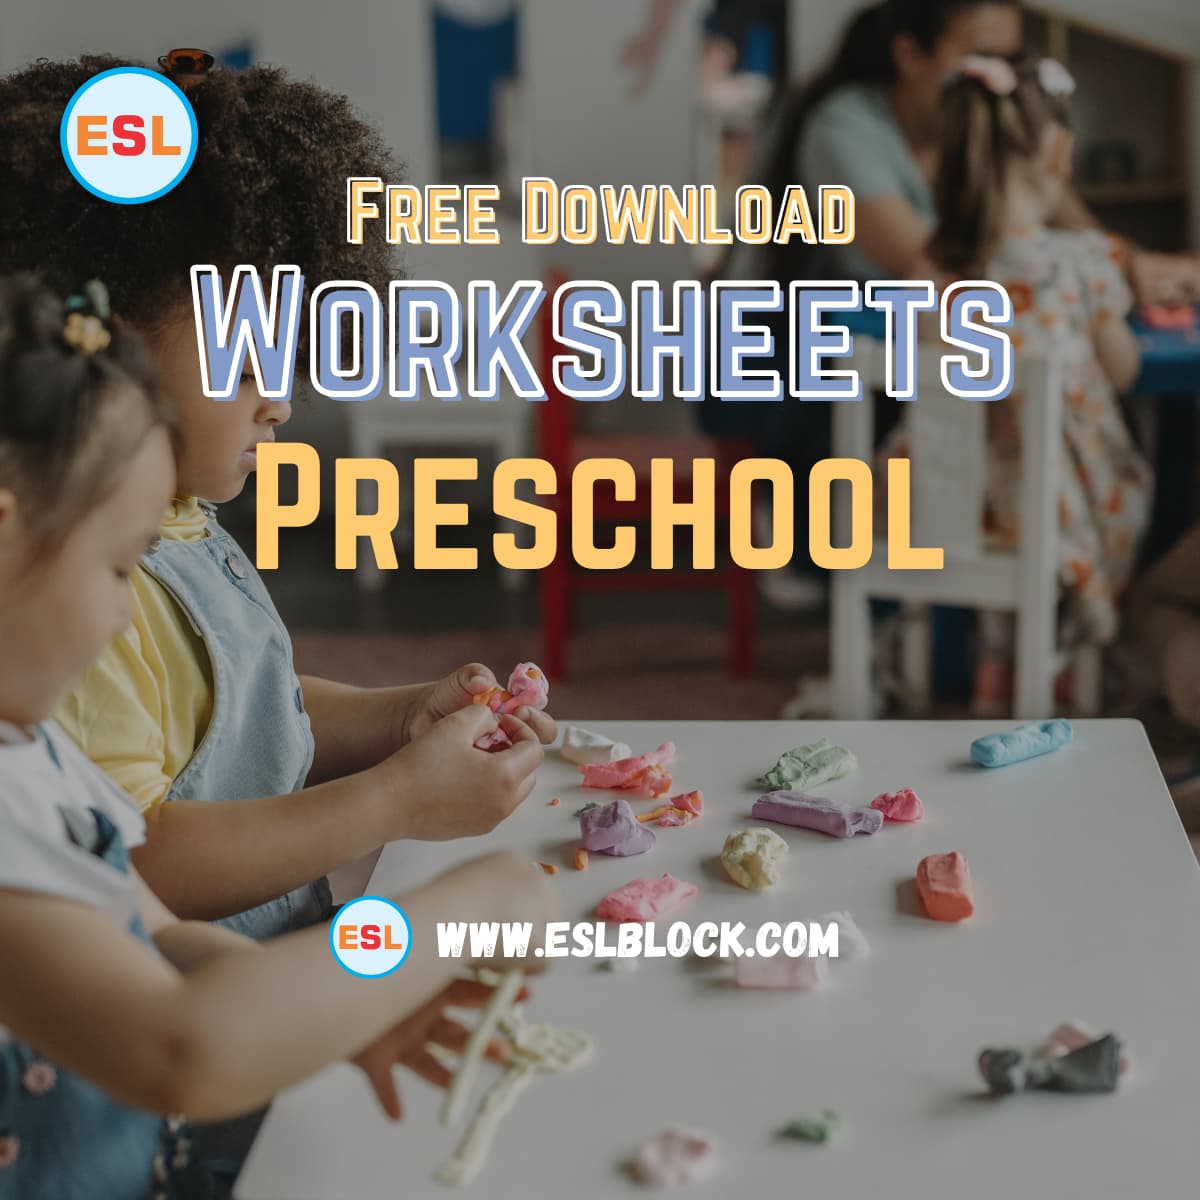 Preschool Worksheets: Preschool is an exciting time for children as they start to explore the world around them and develop important skills that will lay the foundation for their education.